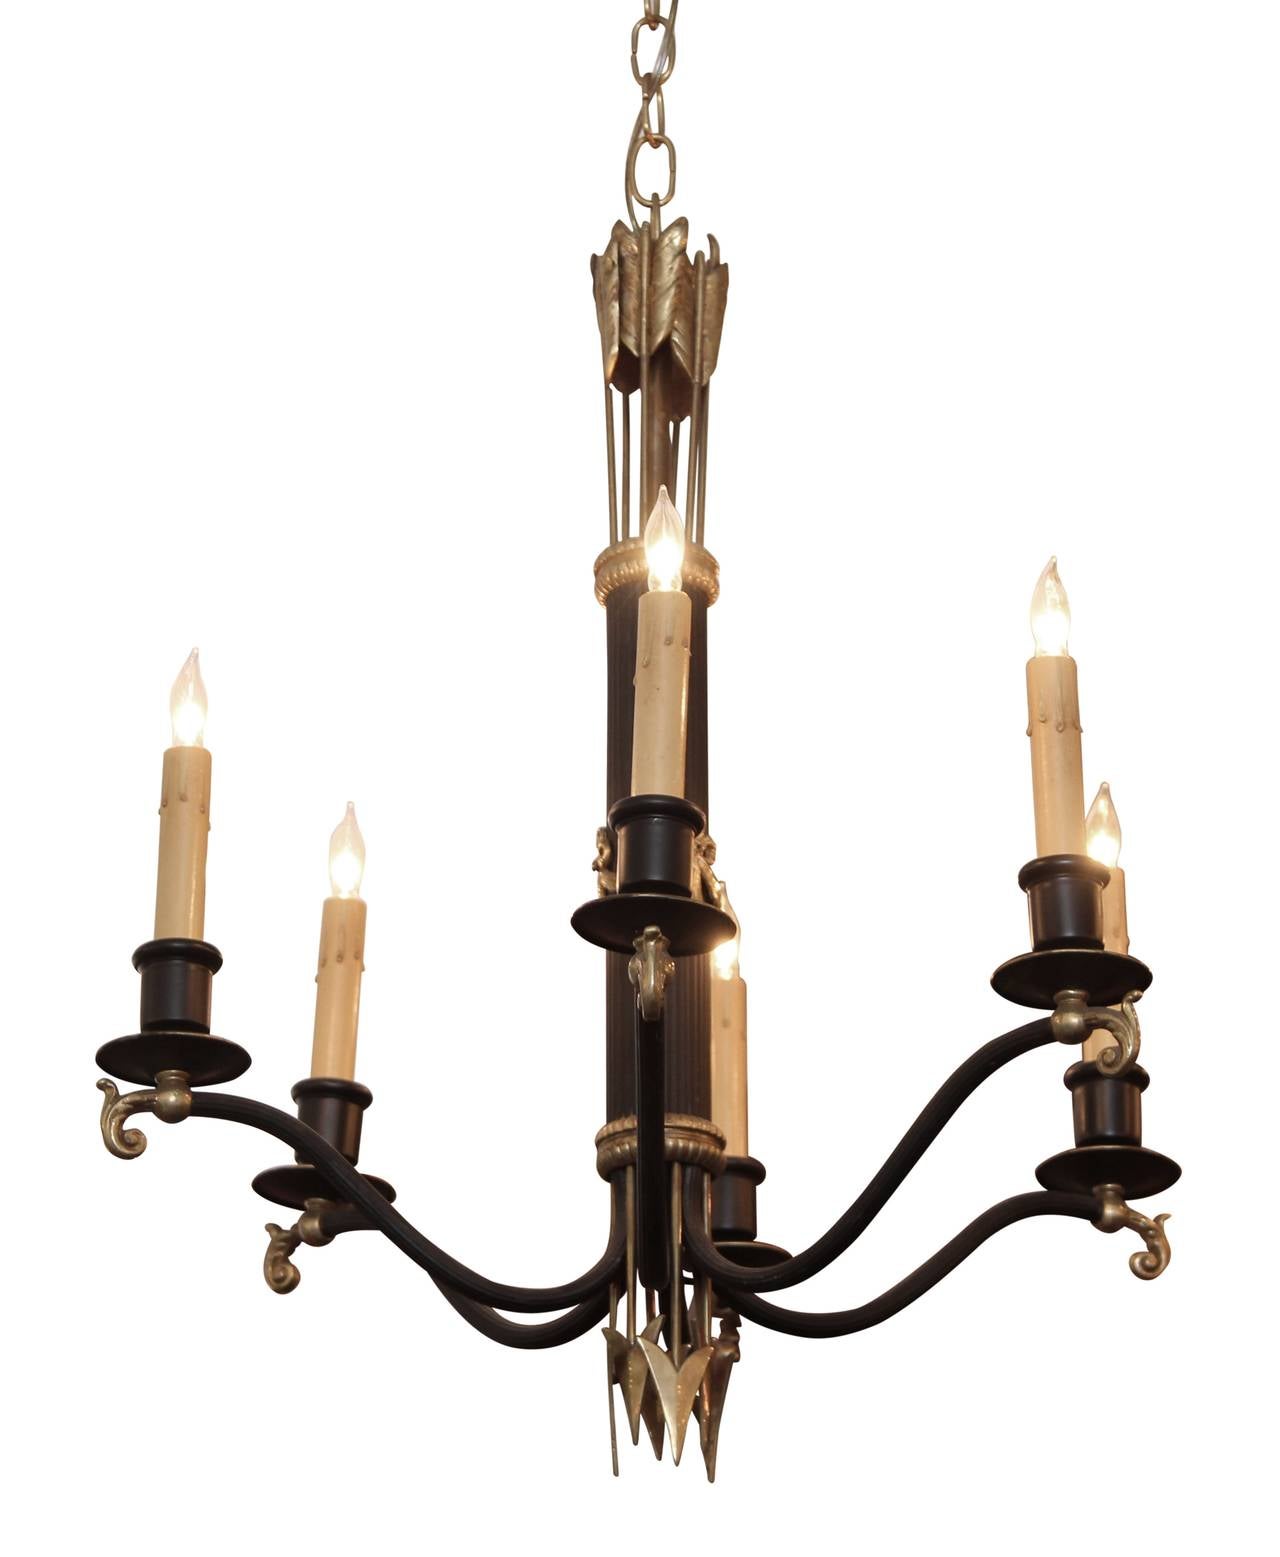 1930s chandelier painted gold and black in the French Regency style, featuring six lights and both swags and spears. This item can be viewed at our 302 Bowery location in Manhattan.